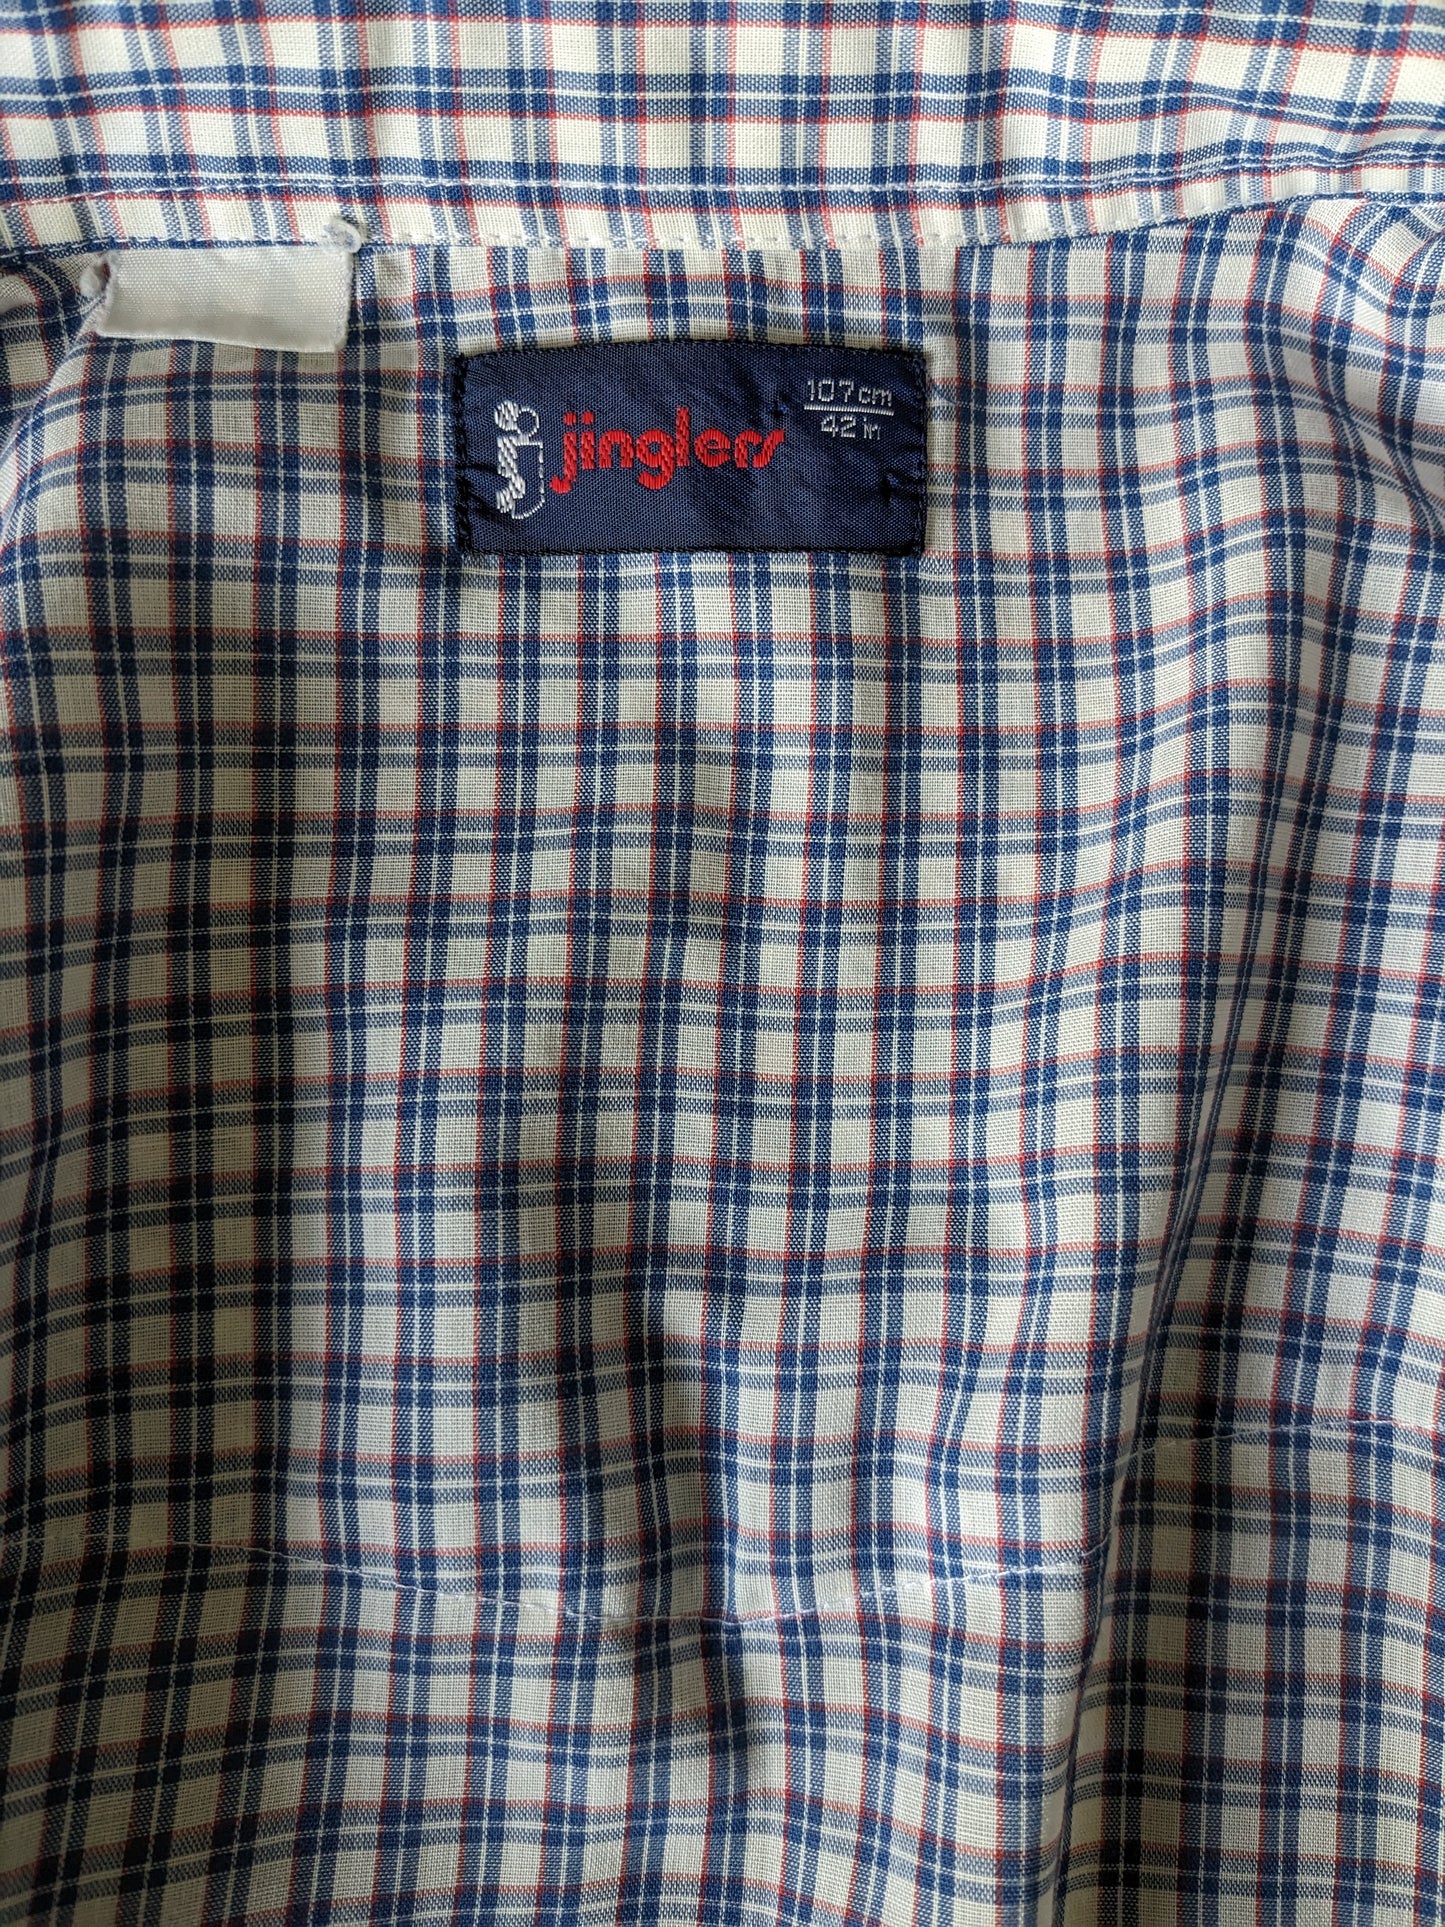 Vintage Jingles shirt short sleeve and snaps. Blue white red checked. Size L.